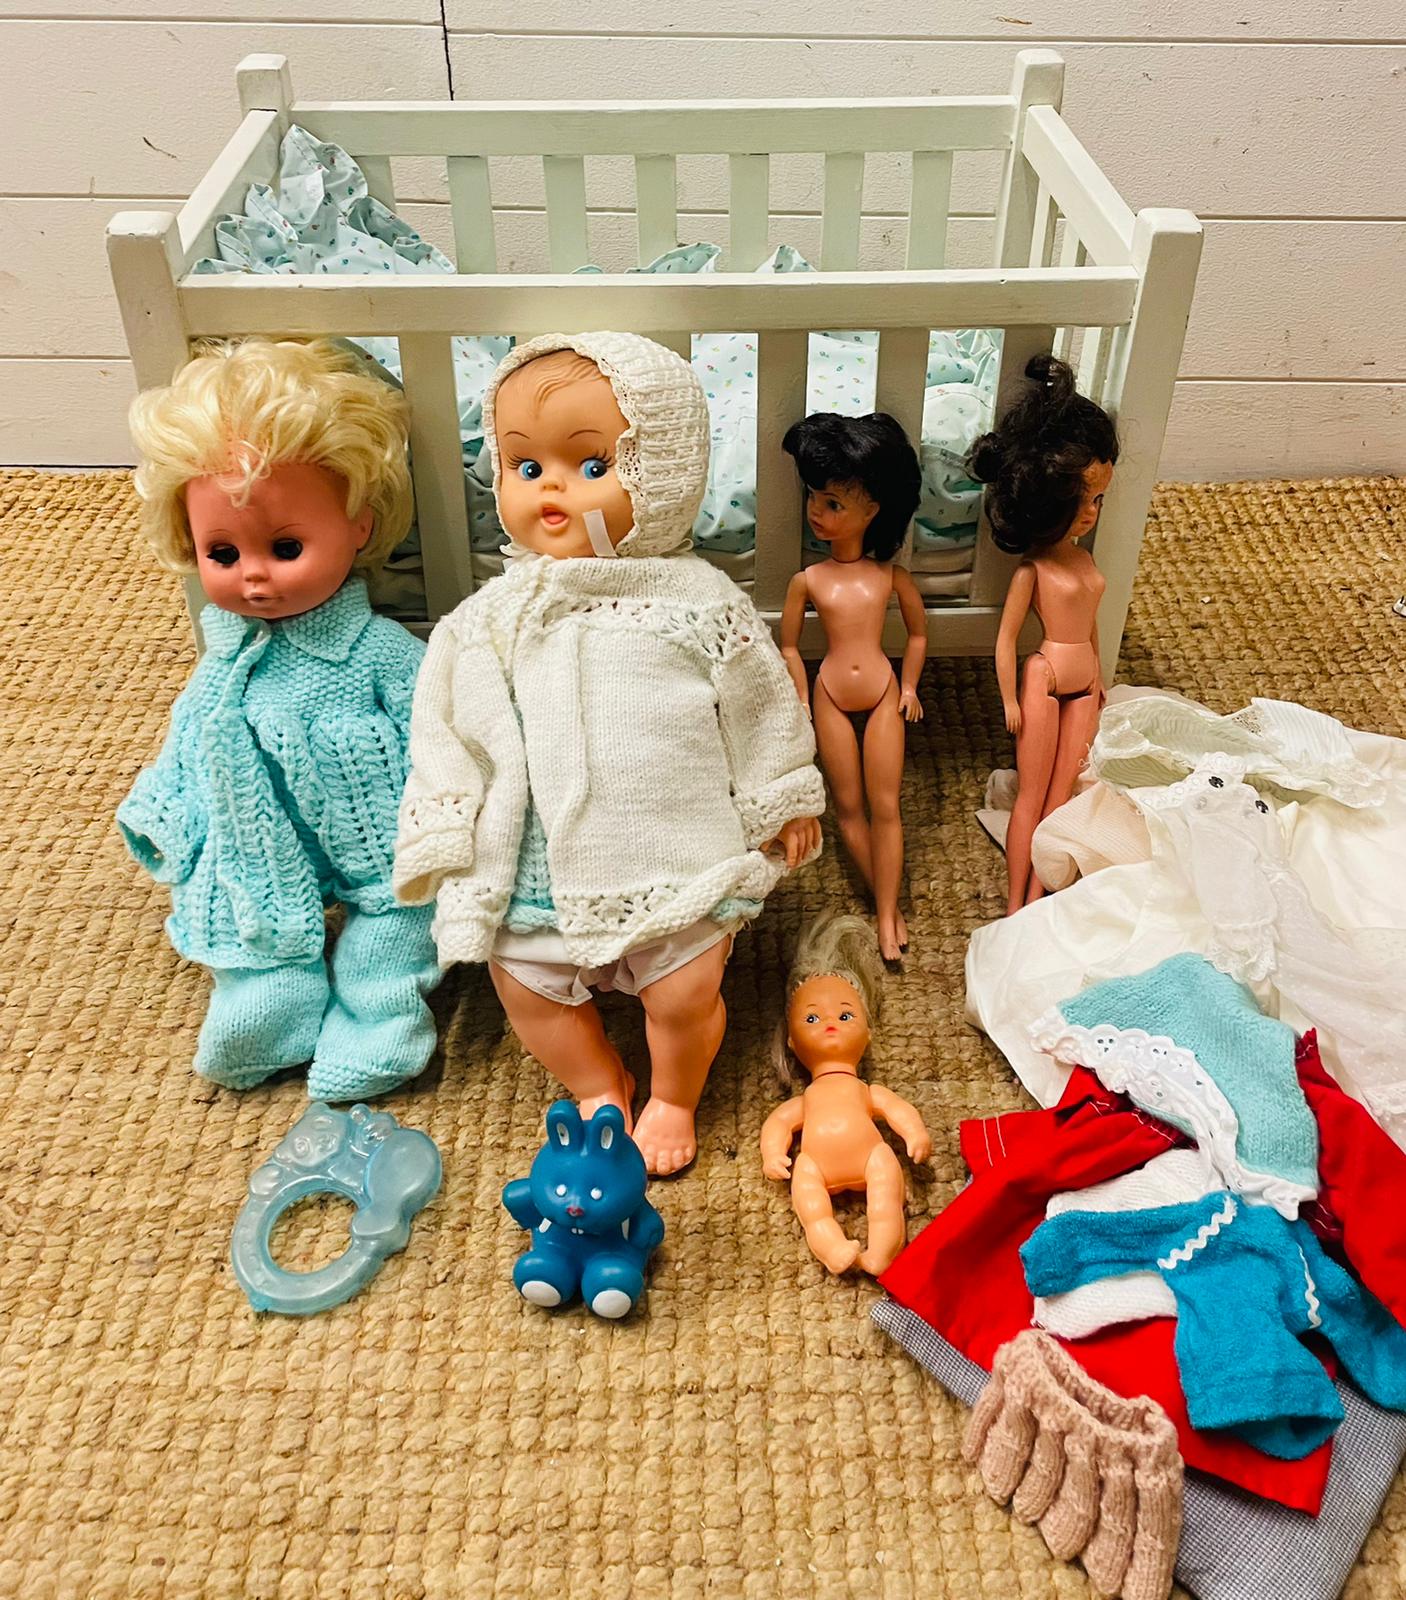 A vintage white wooden children's toy doll cot with dolls, bedding and toys - Image 6 of 10